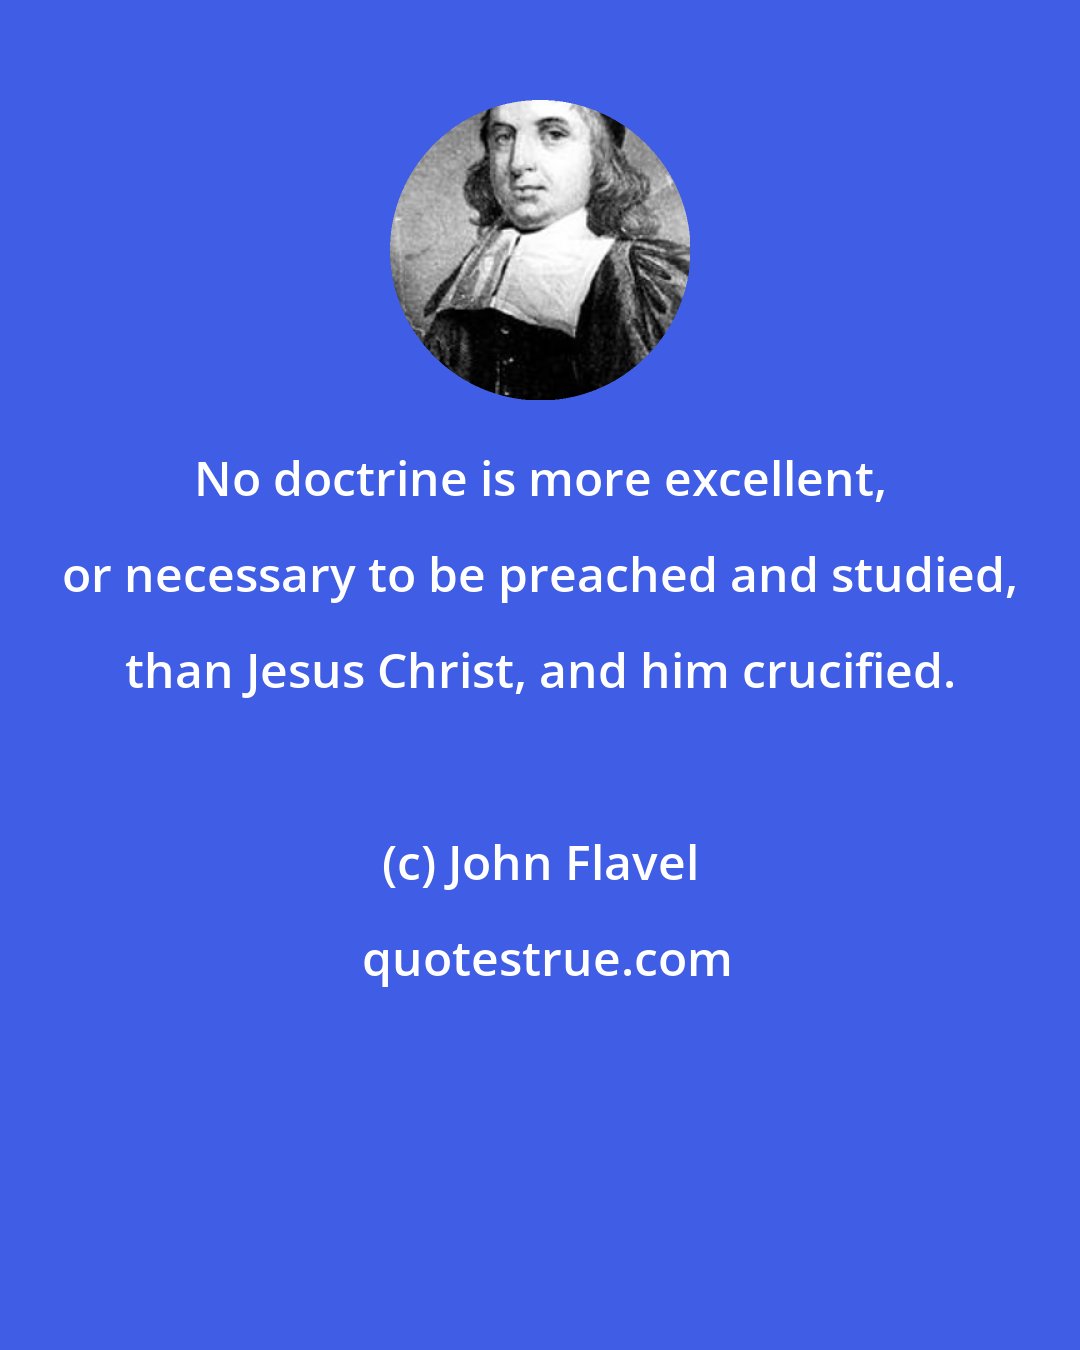 John Flavel: No doctrine is more excellent, or necessary to be preached and studied, than Jesus Christ, and him crucified.